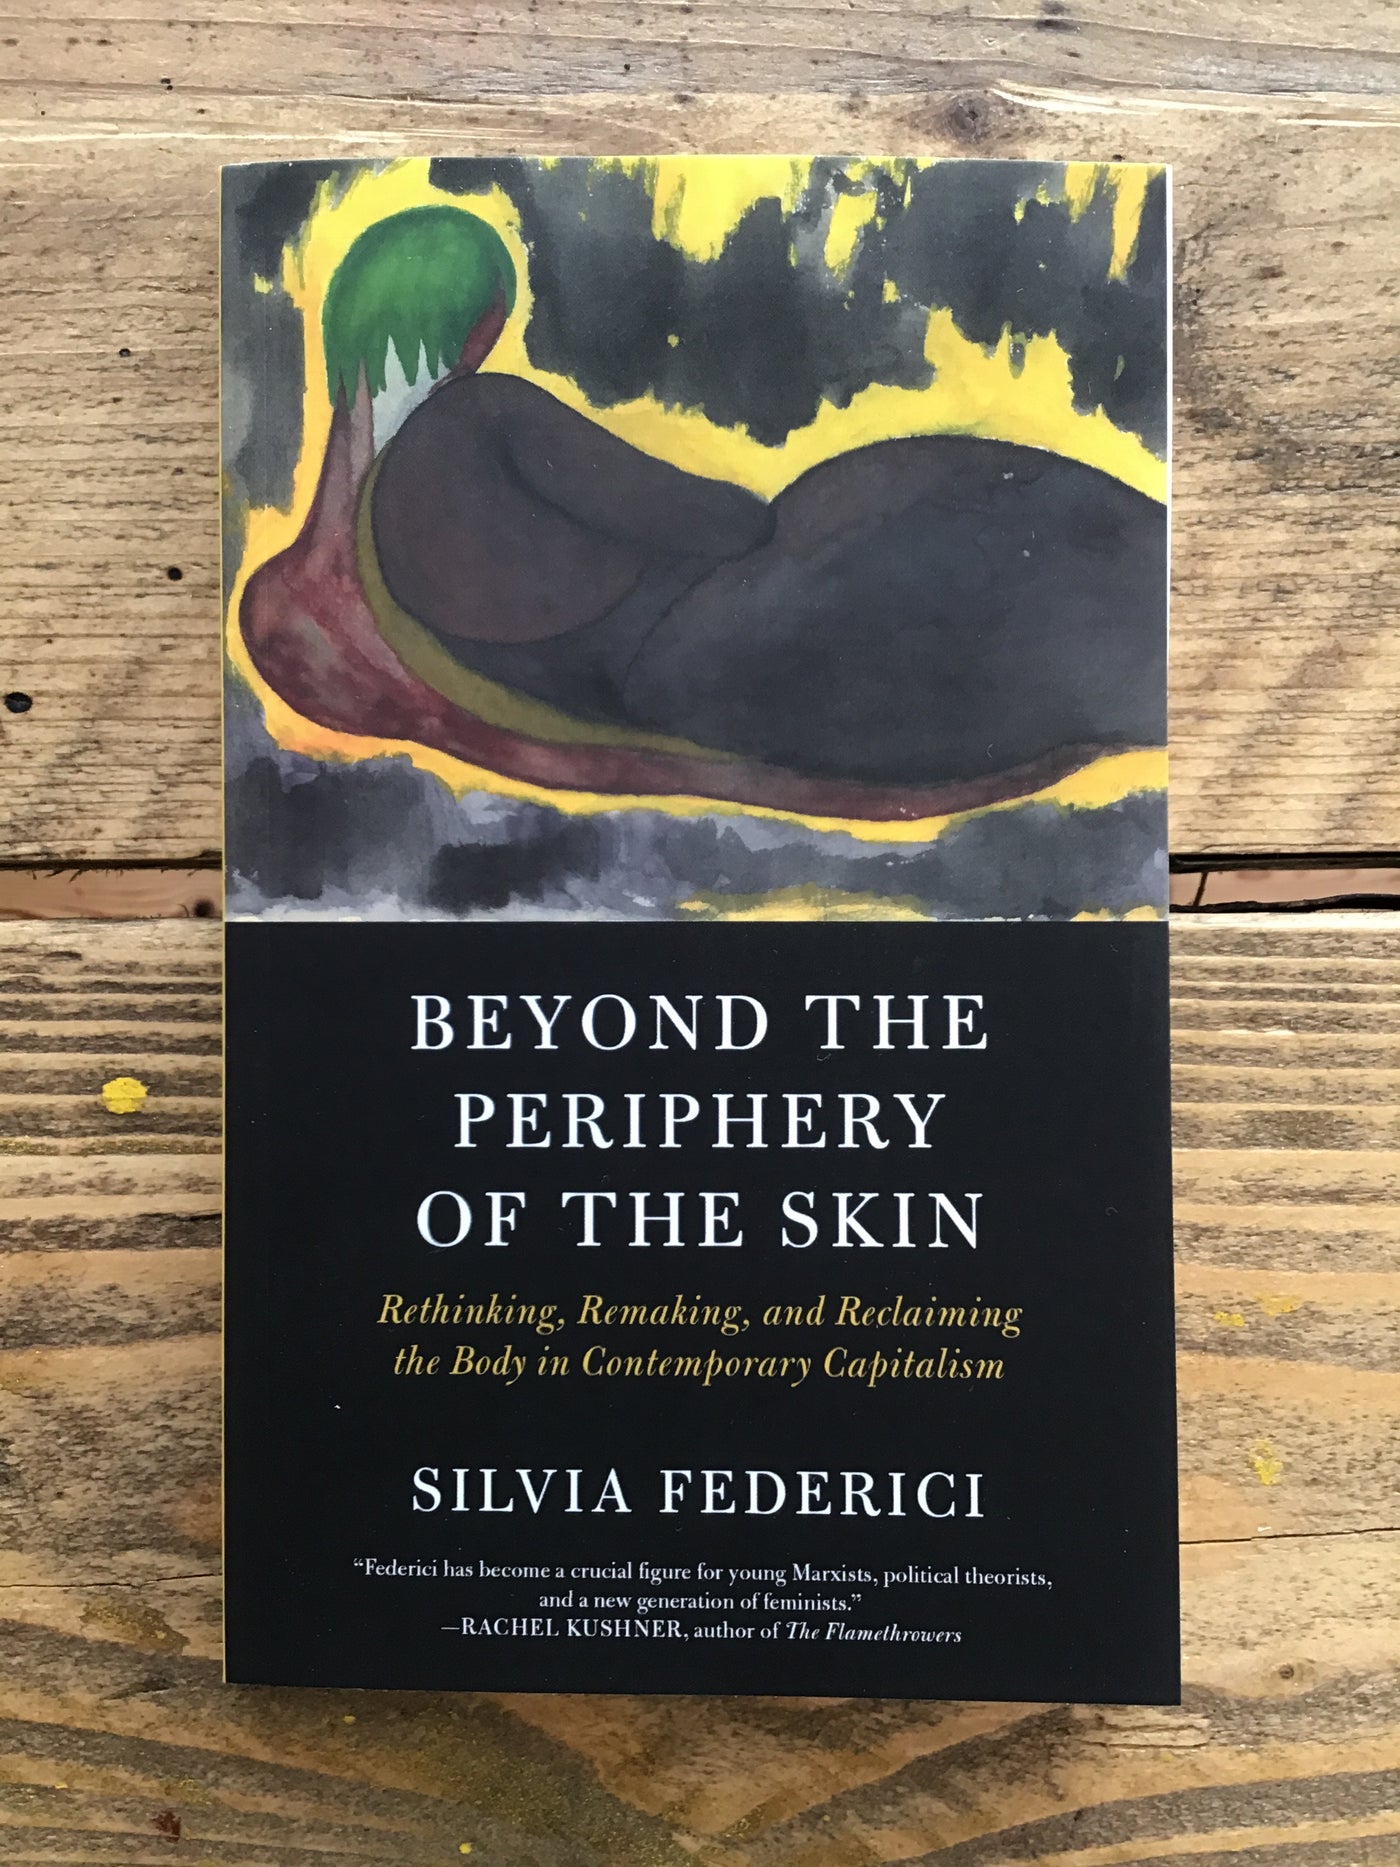 Beyond the Periphery of the Skin